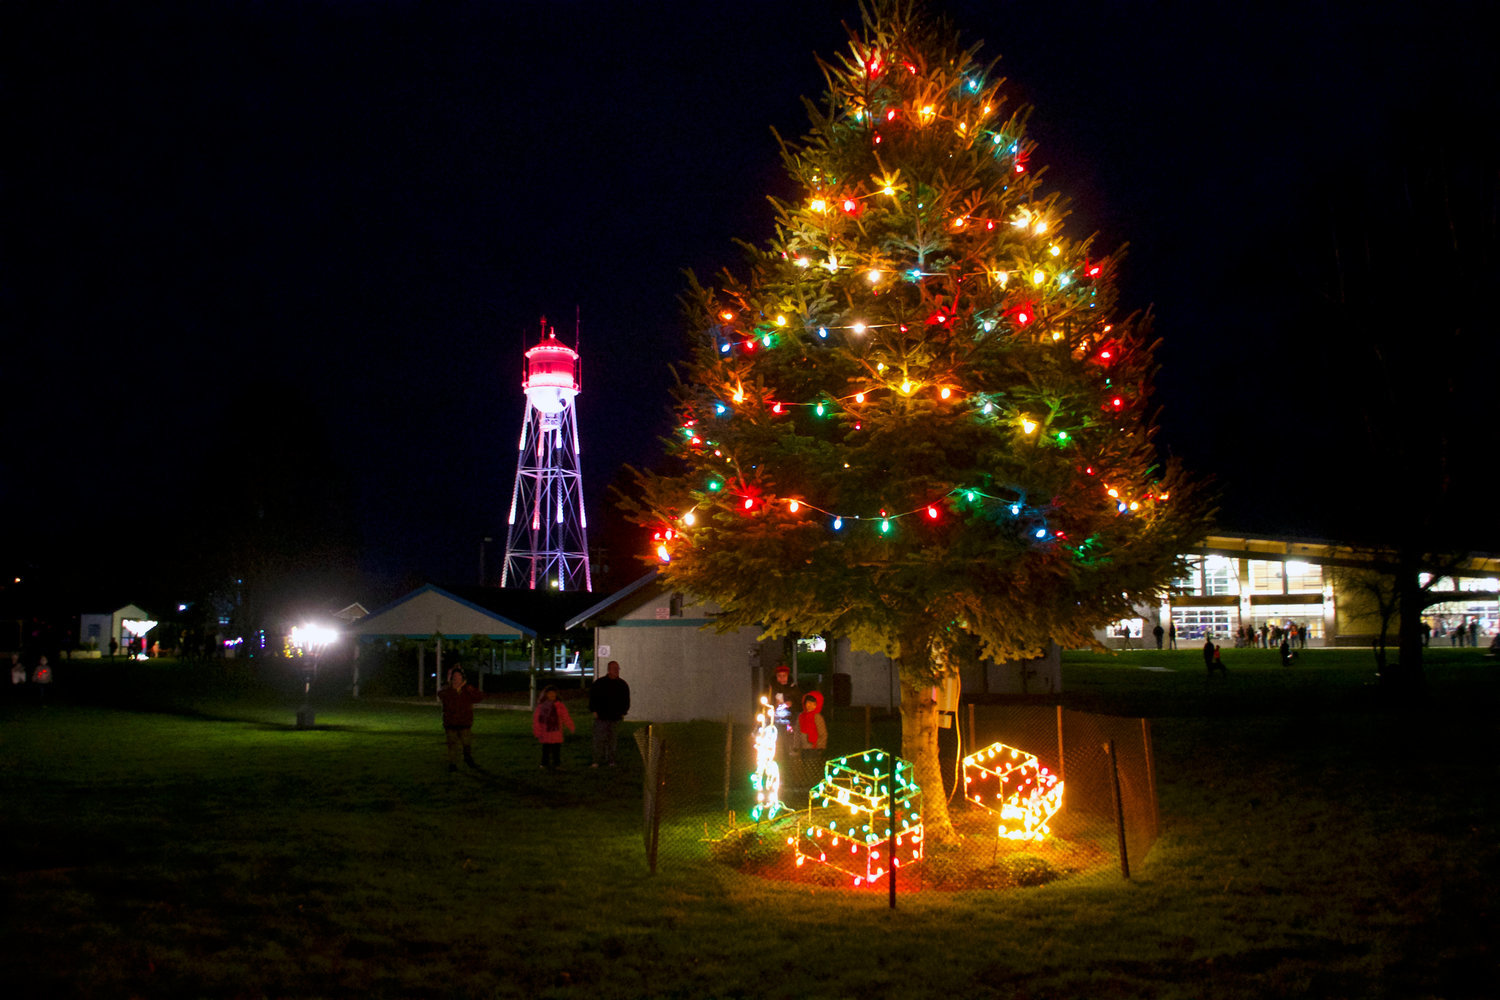 The Christmas tree at Yelm City Park will be lit up on Friday, Dec. 2 during the Christmas in the Park event.